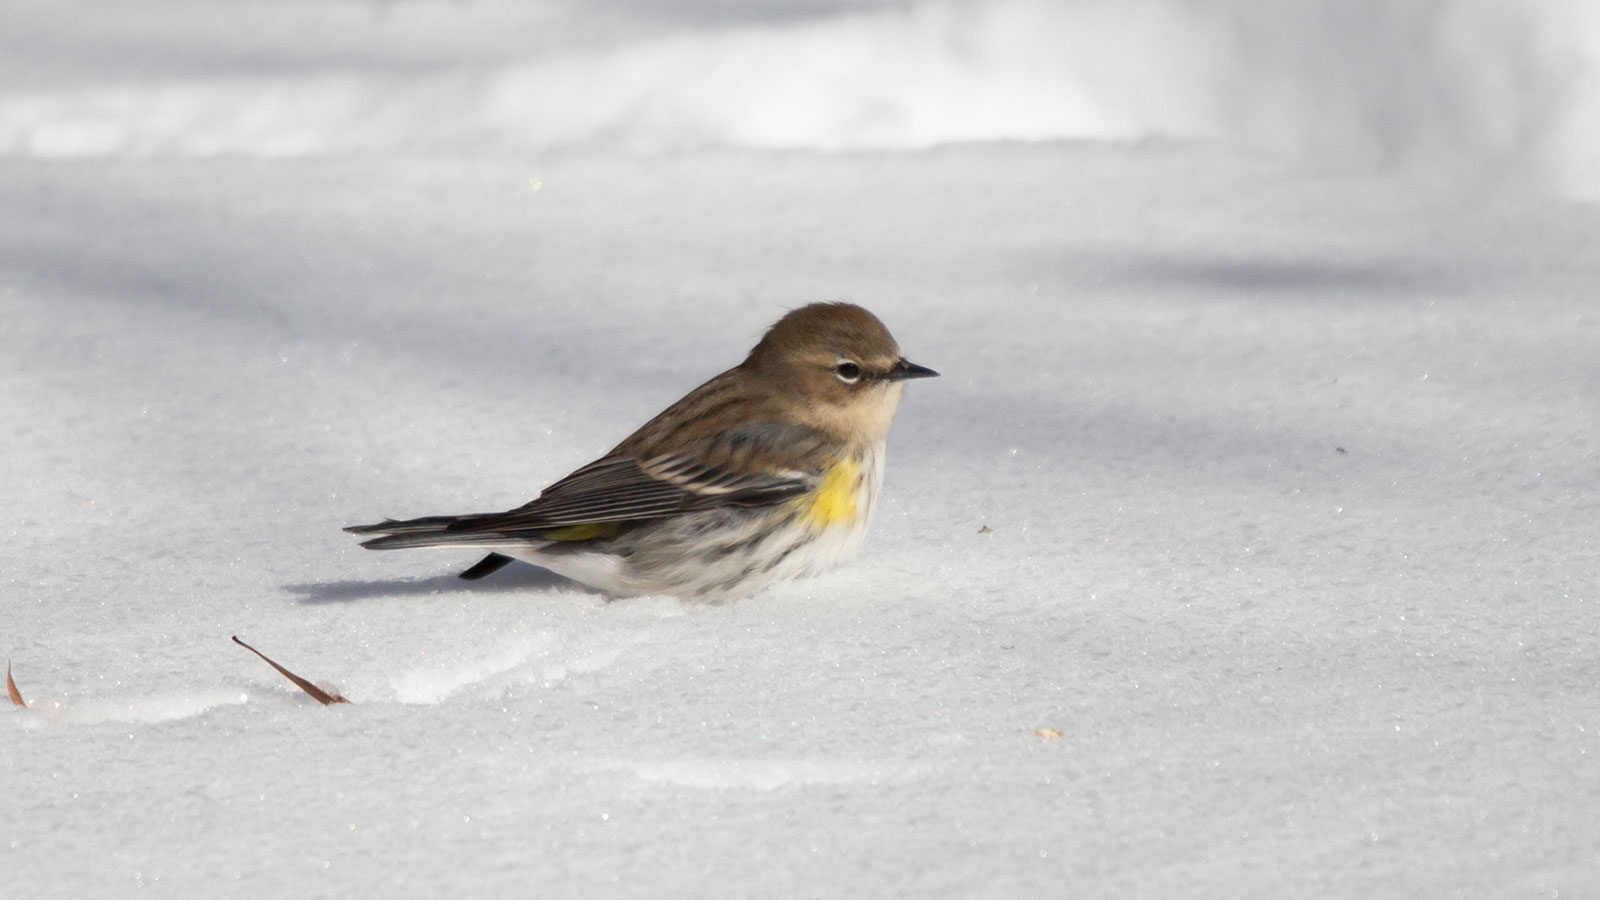 Female yellow-rumped warbler standing in shallow snow